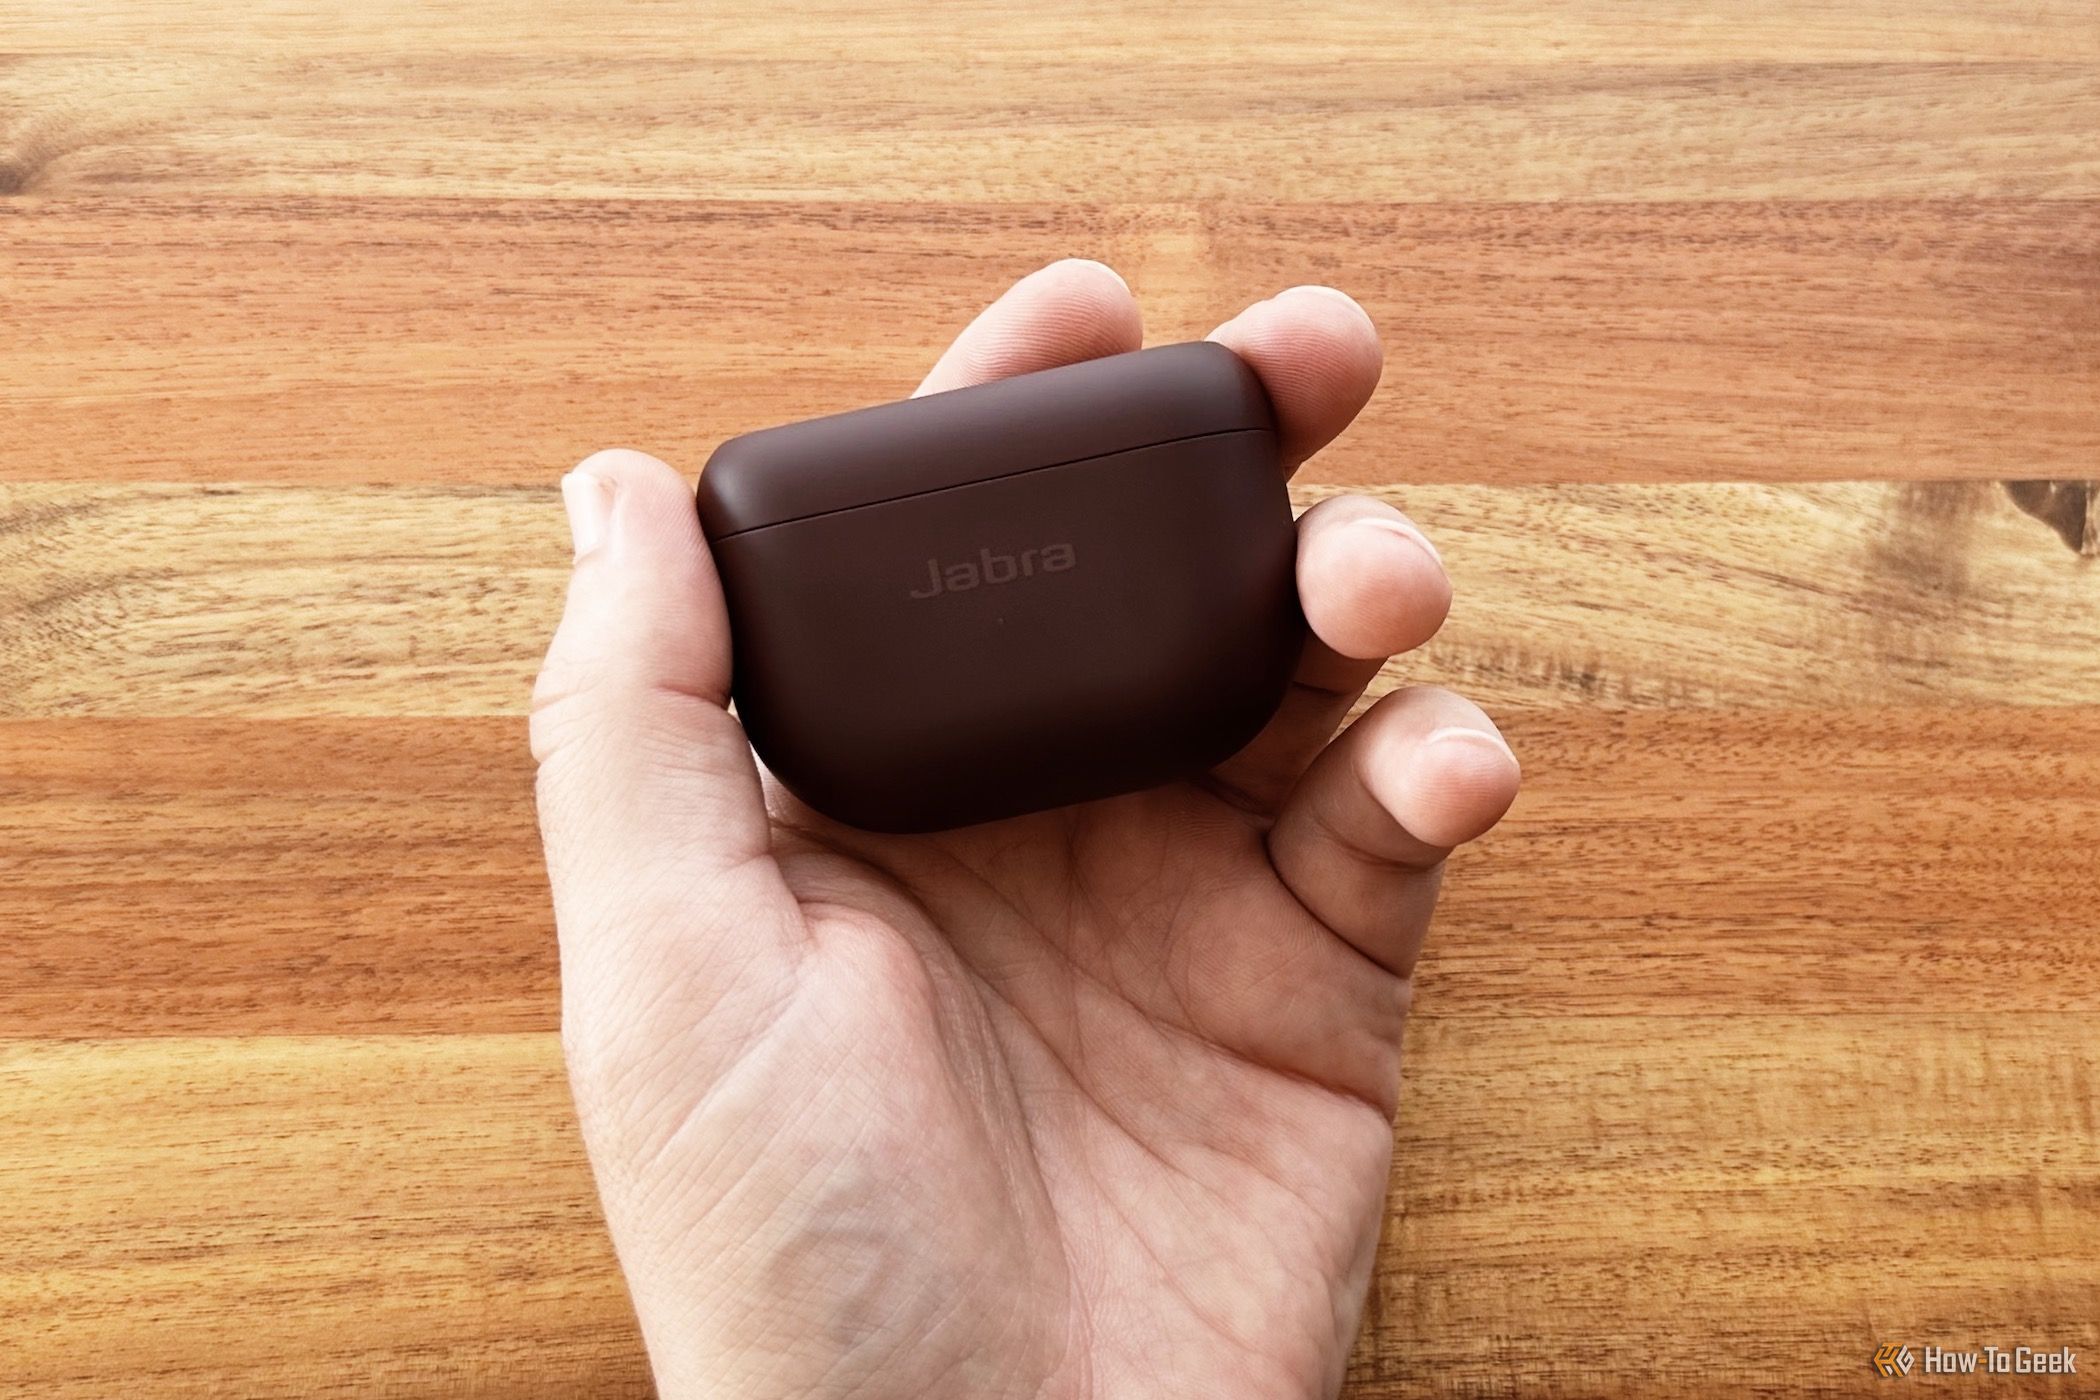 A hand holding the Jabra Elite 10 charging case